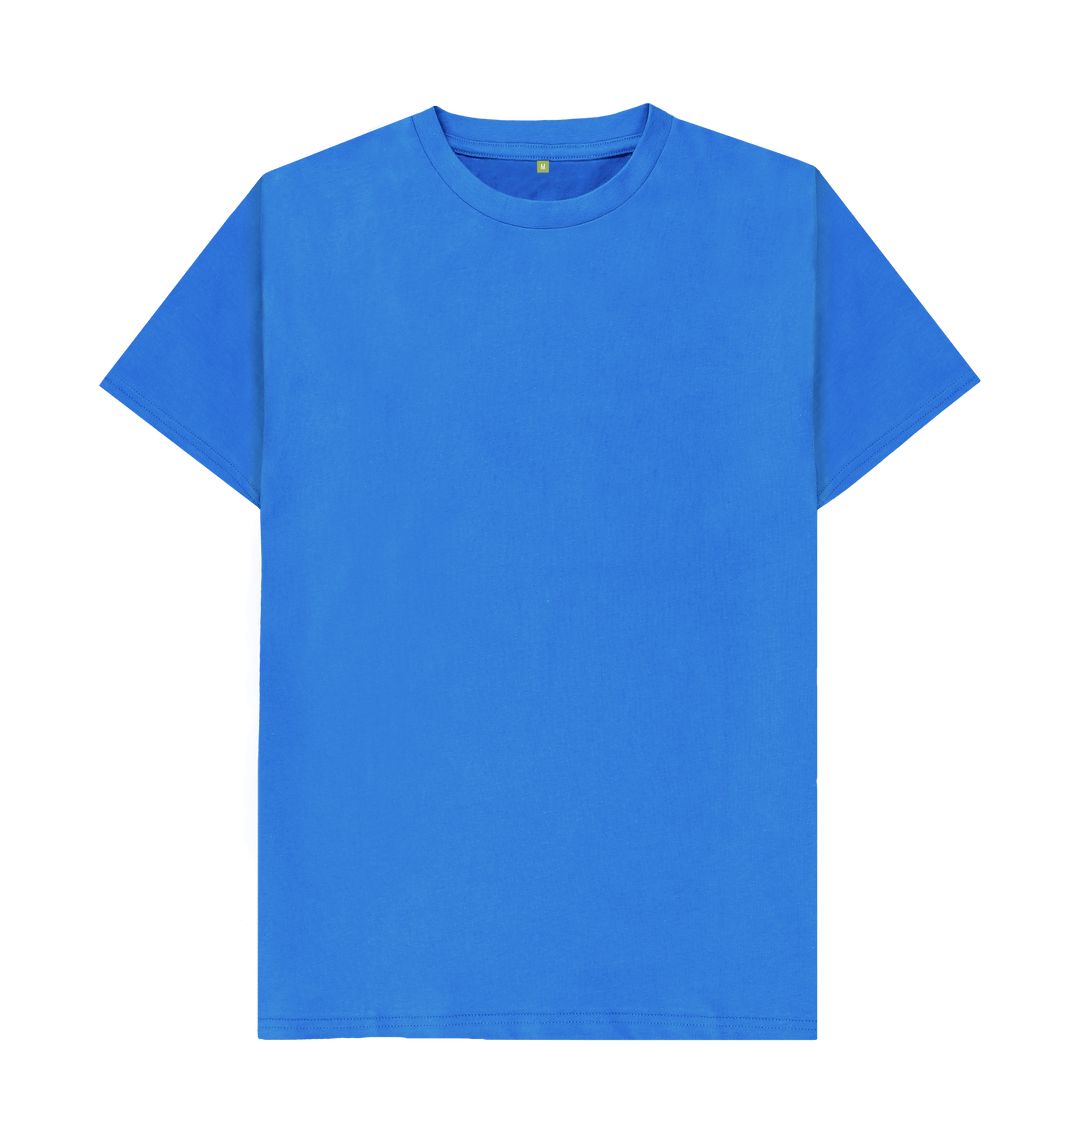 Bright Blue Simple Stuff fitted tee